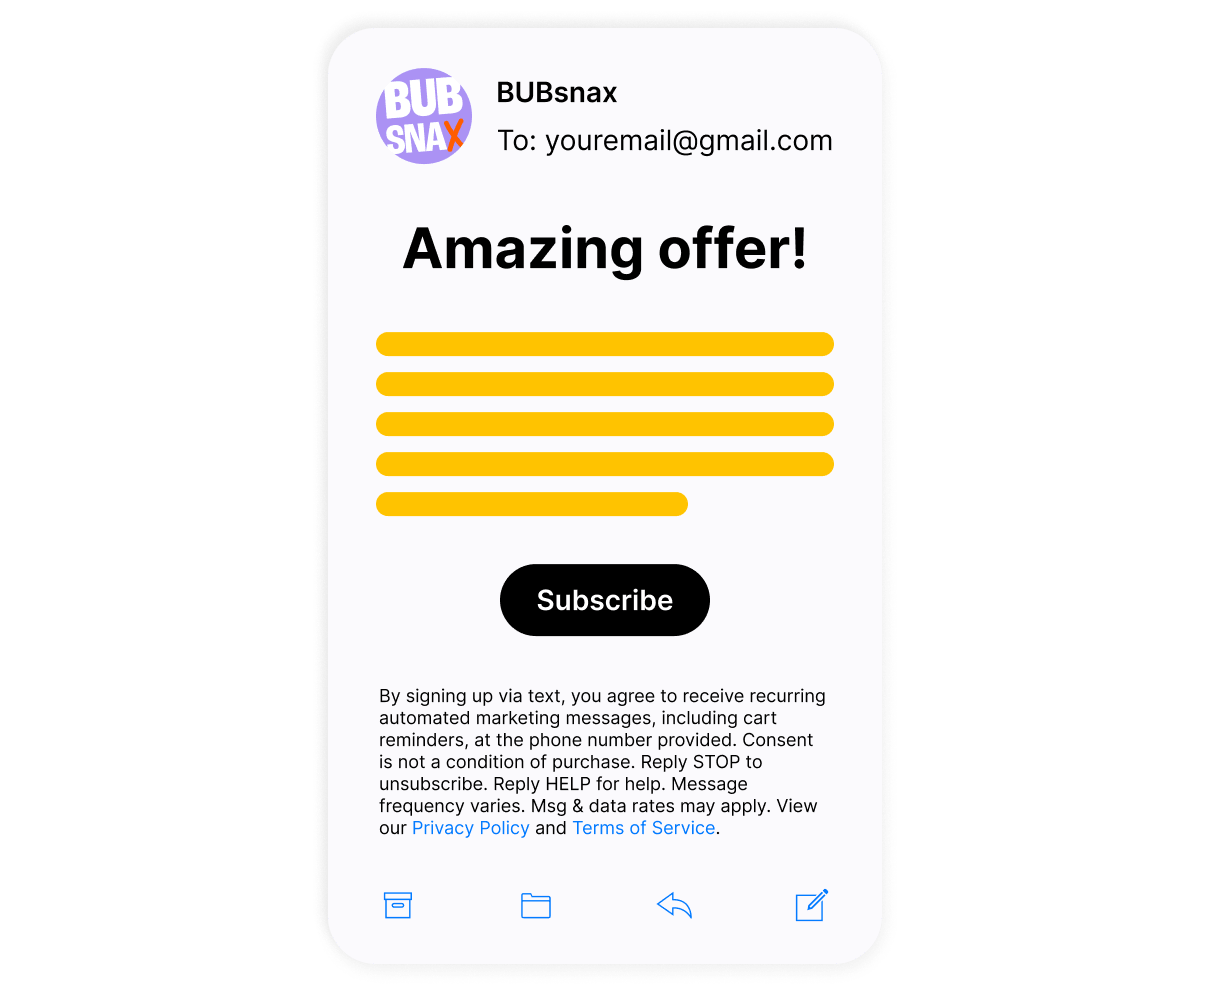 email-bubsnax-amazing-offer